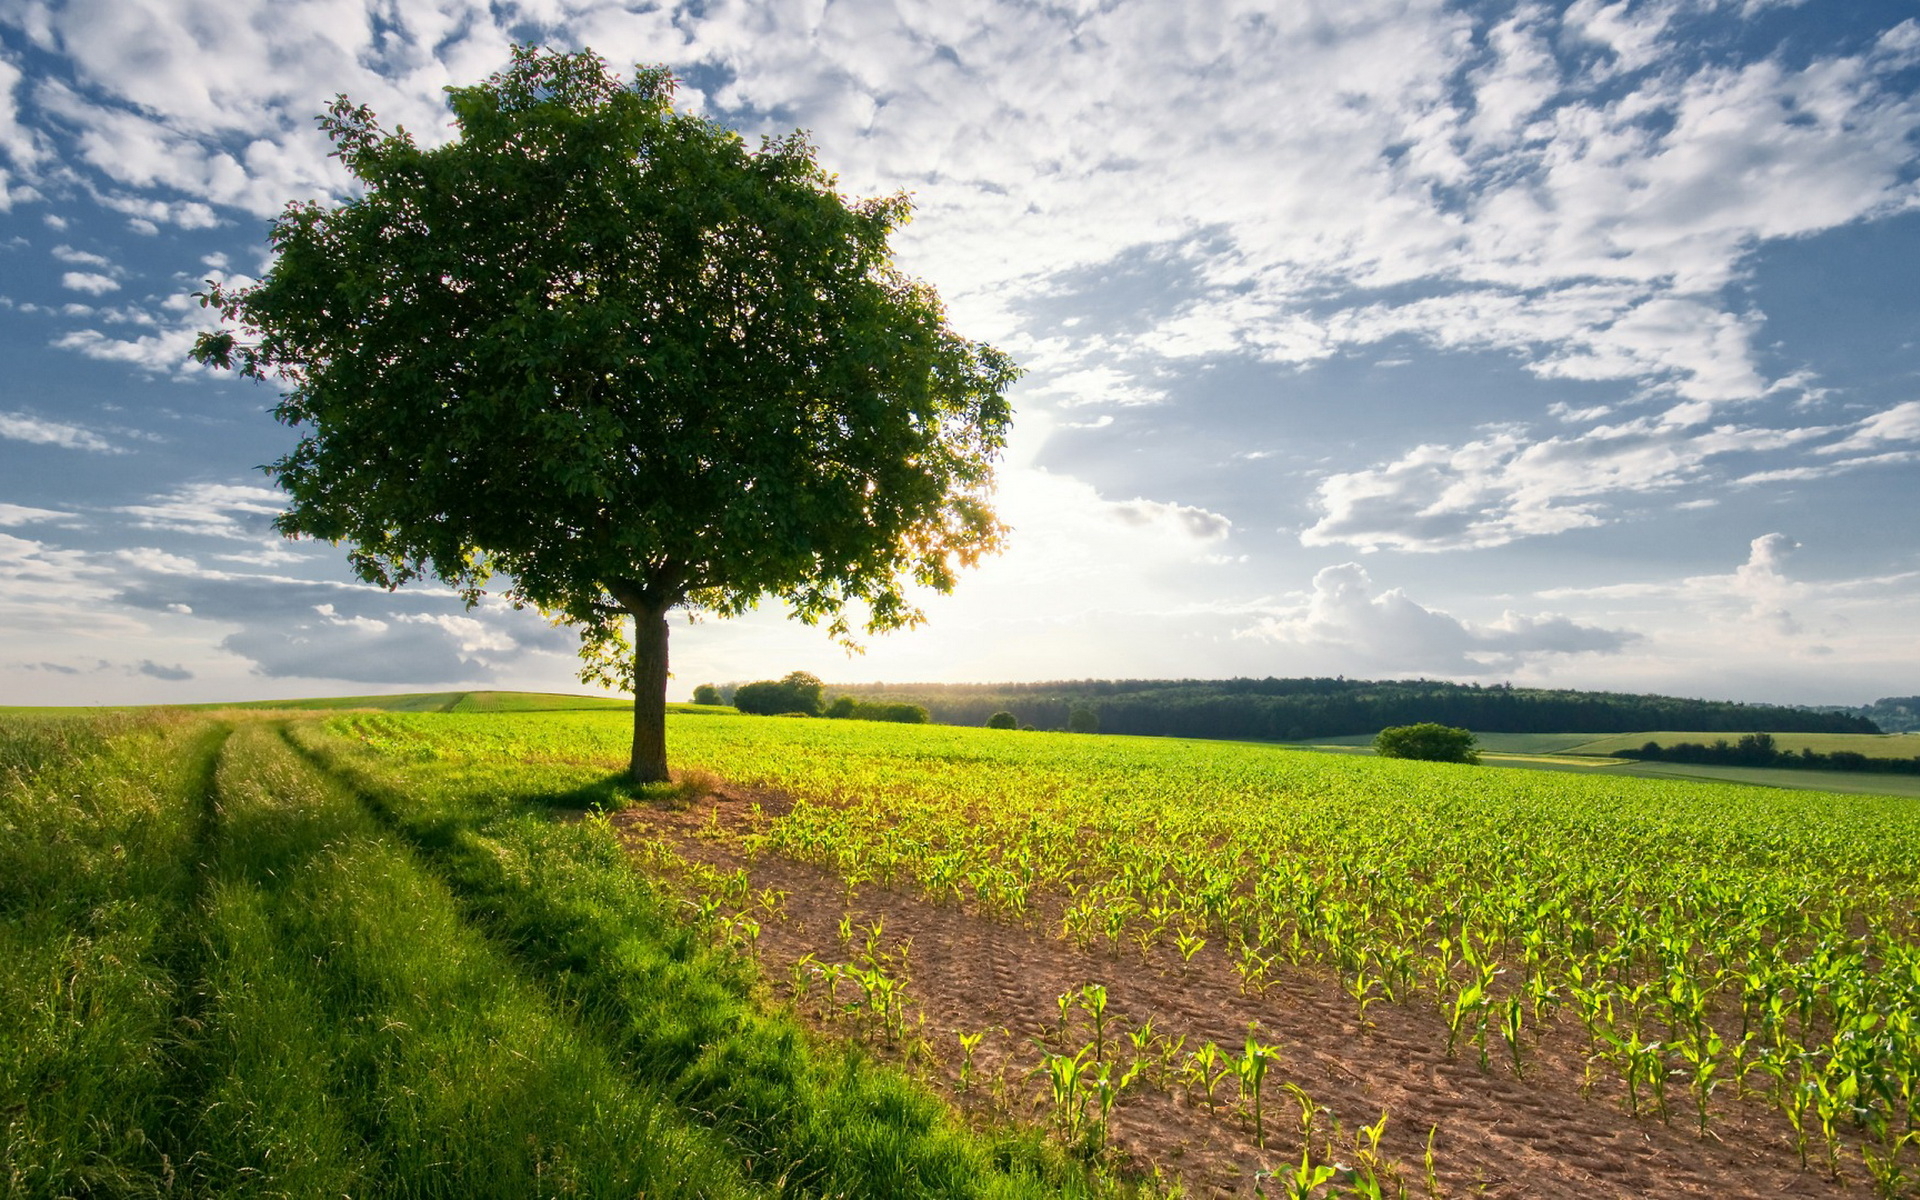 Tree In Field Wallpaper And Image Pictures Photos